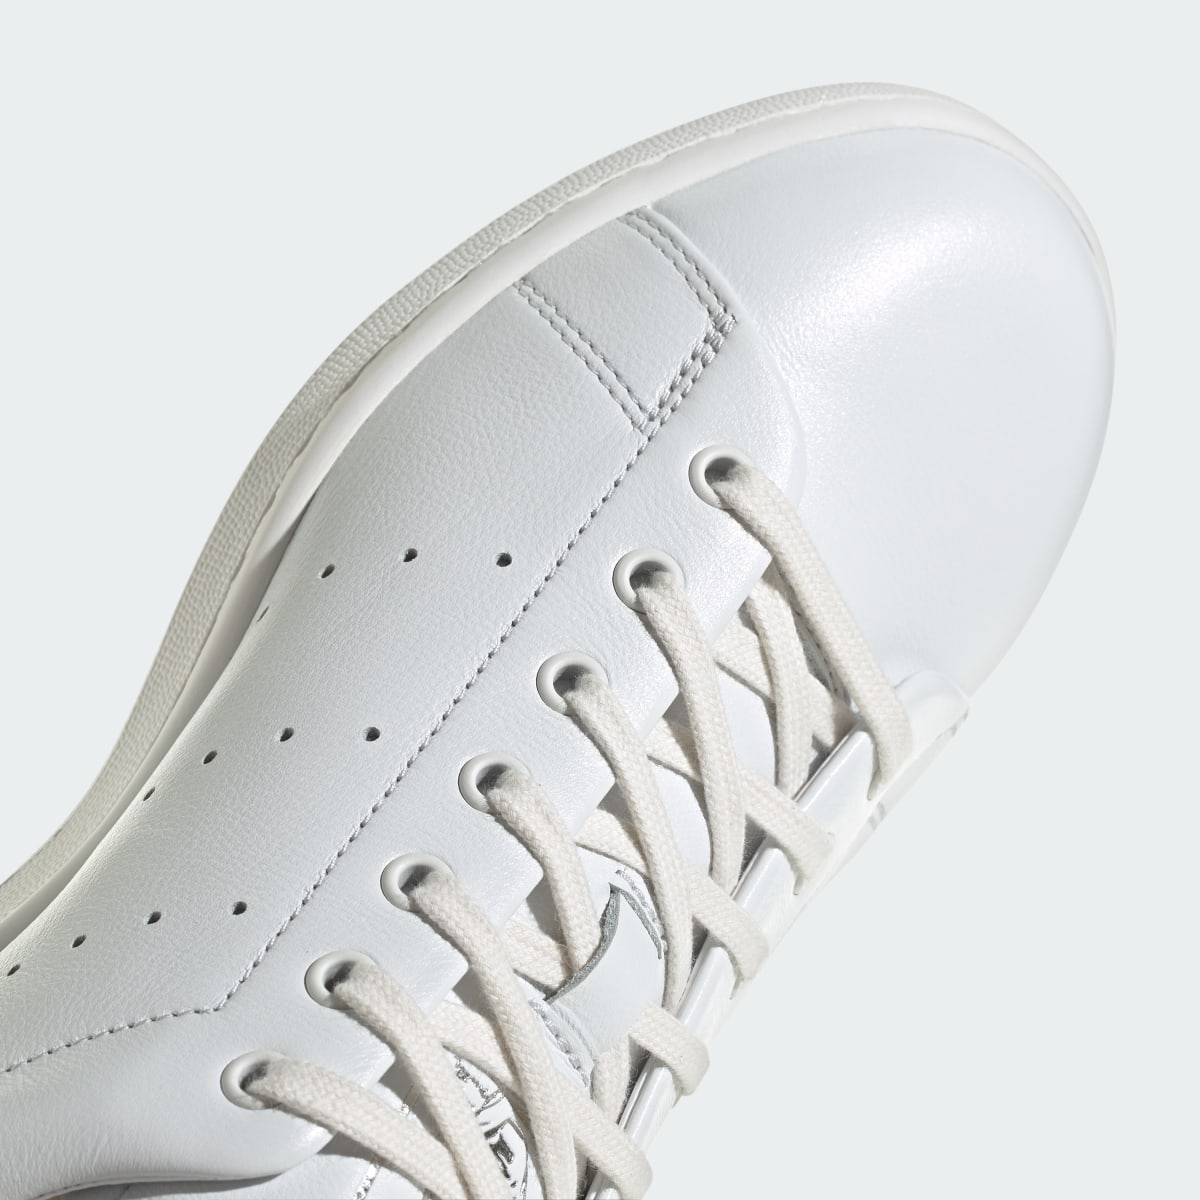 Adidas Chaussure Stan Smith Lux. 11